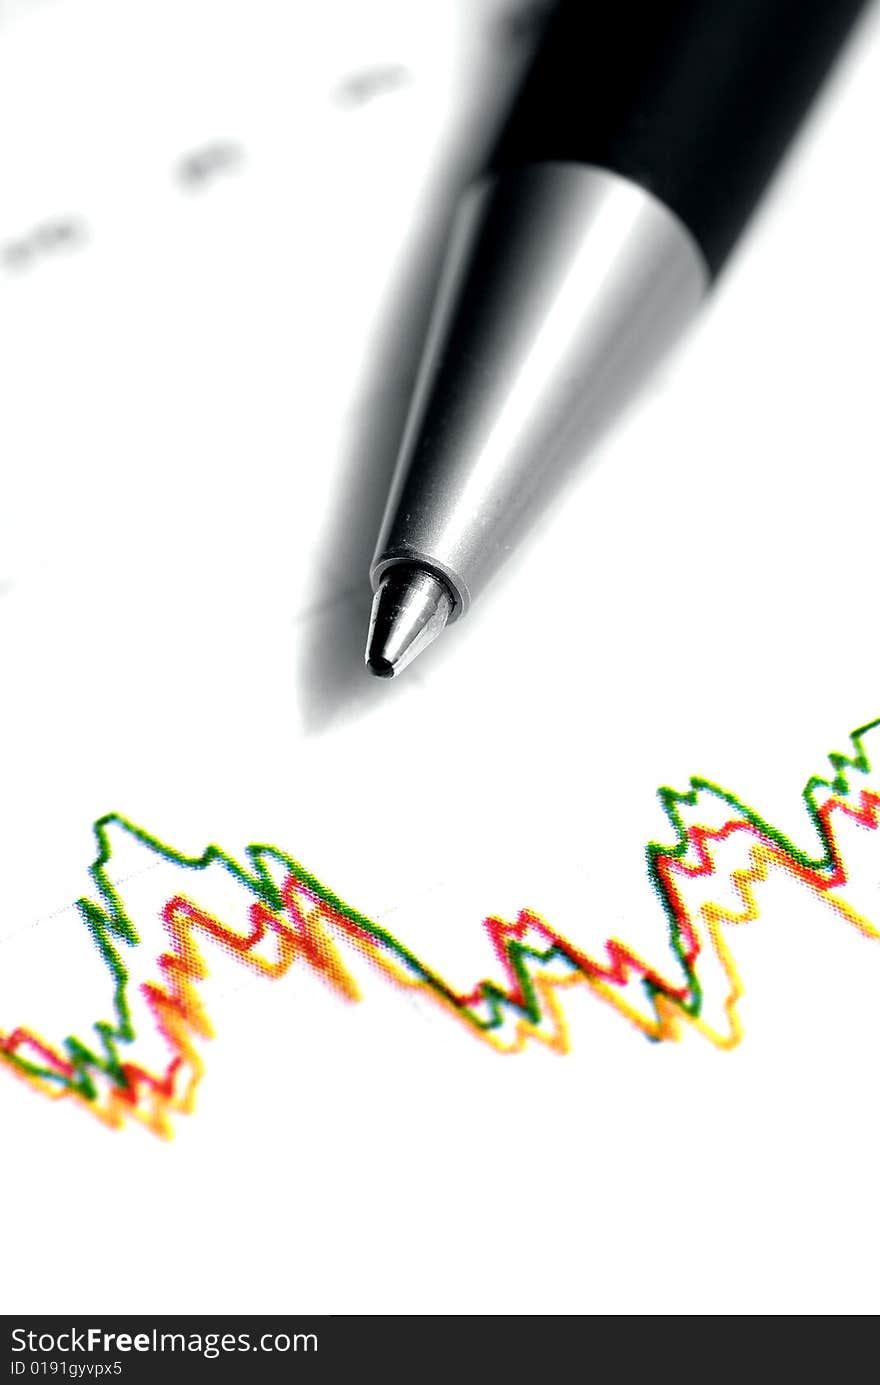 Closeup of stock chart showing losses with pen. Closeup of stock chart showing losses with pen